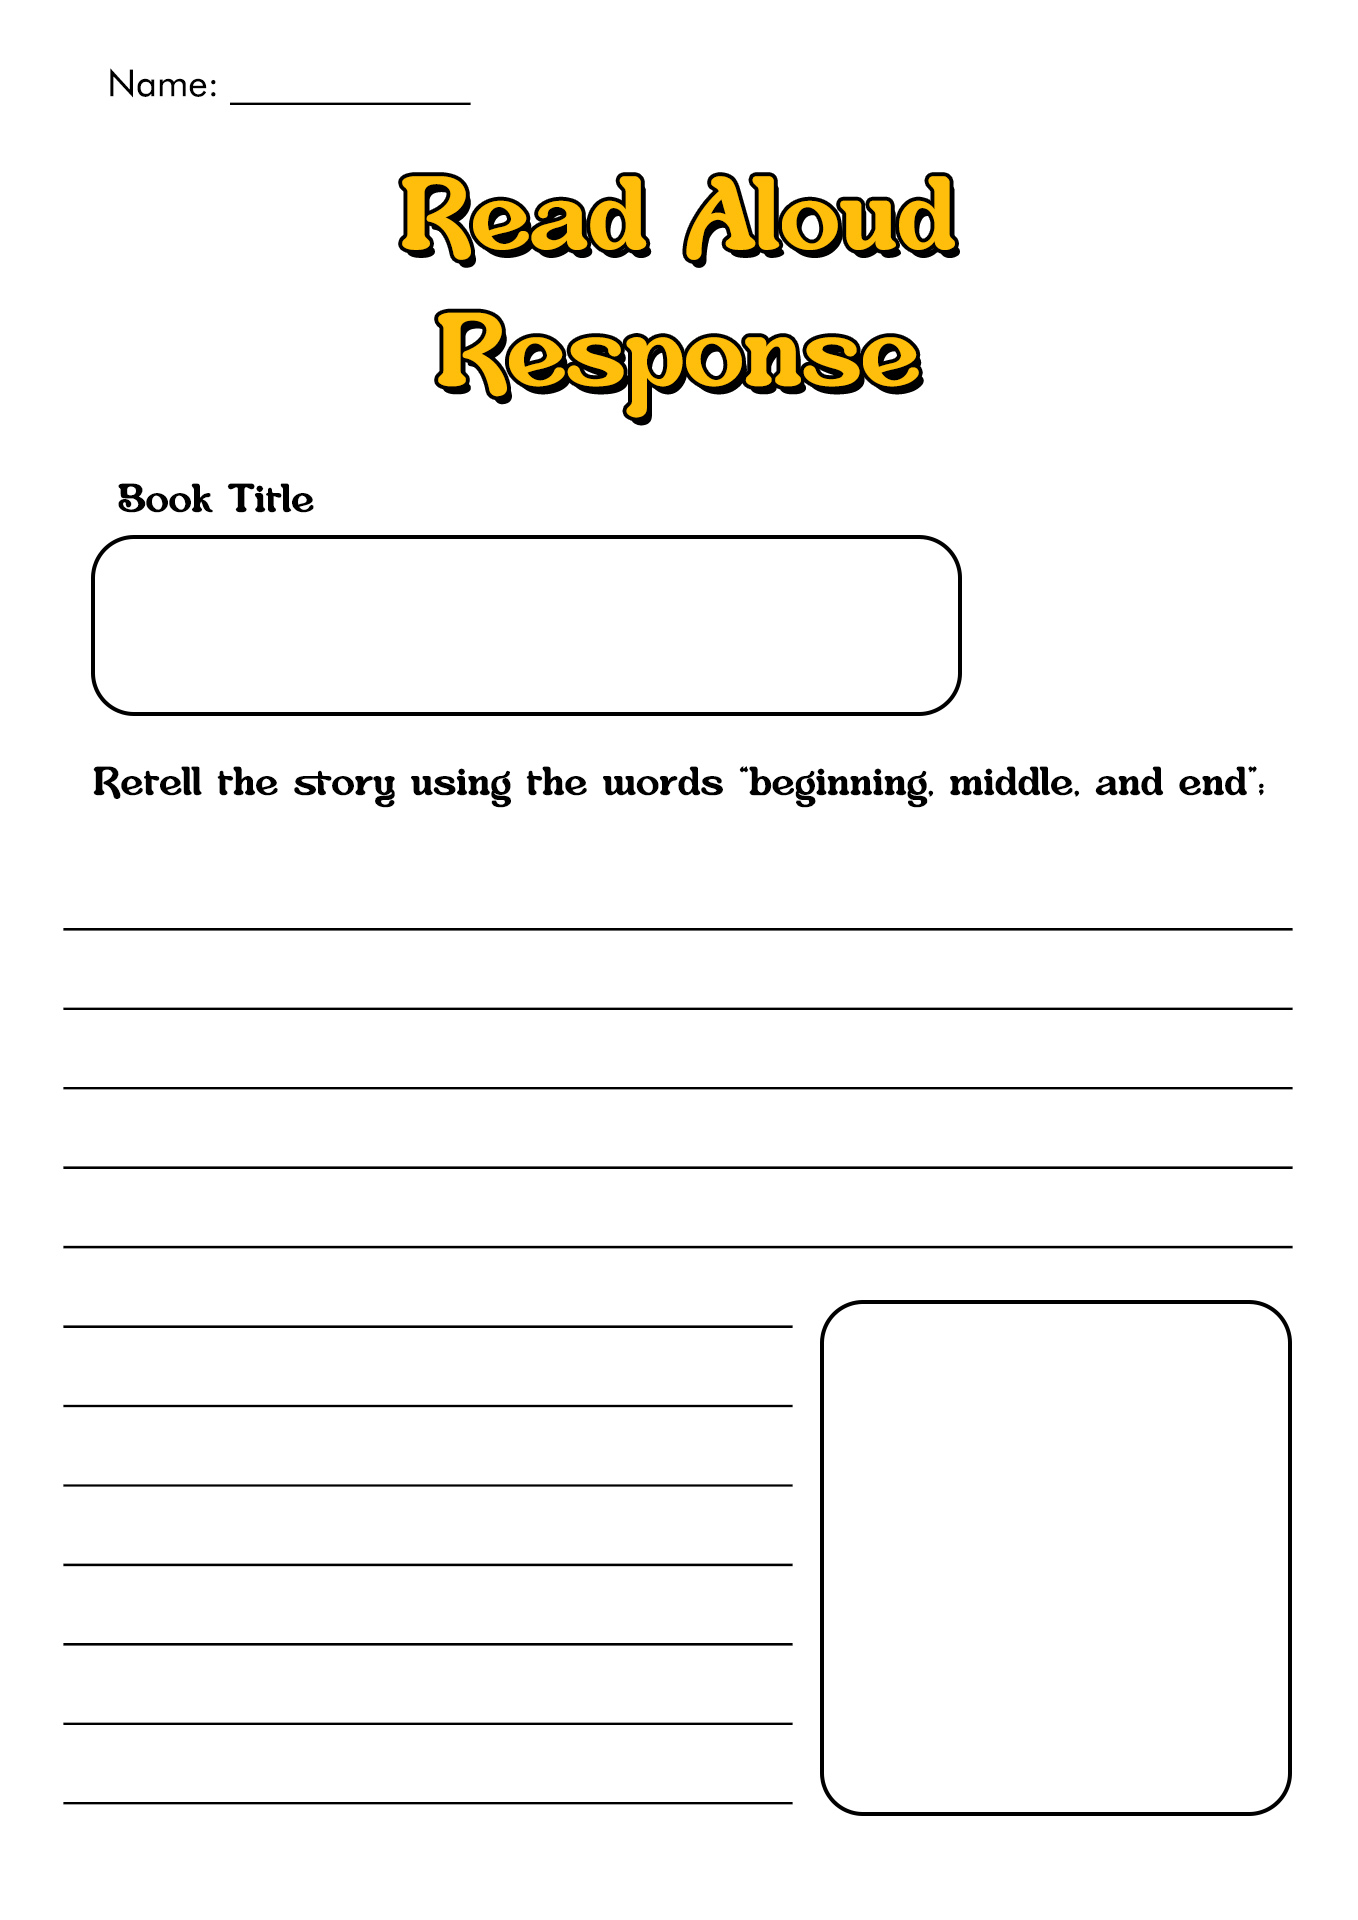 reading-response-worksheets-for-fiction-and-non-fiction-texts-top